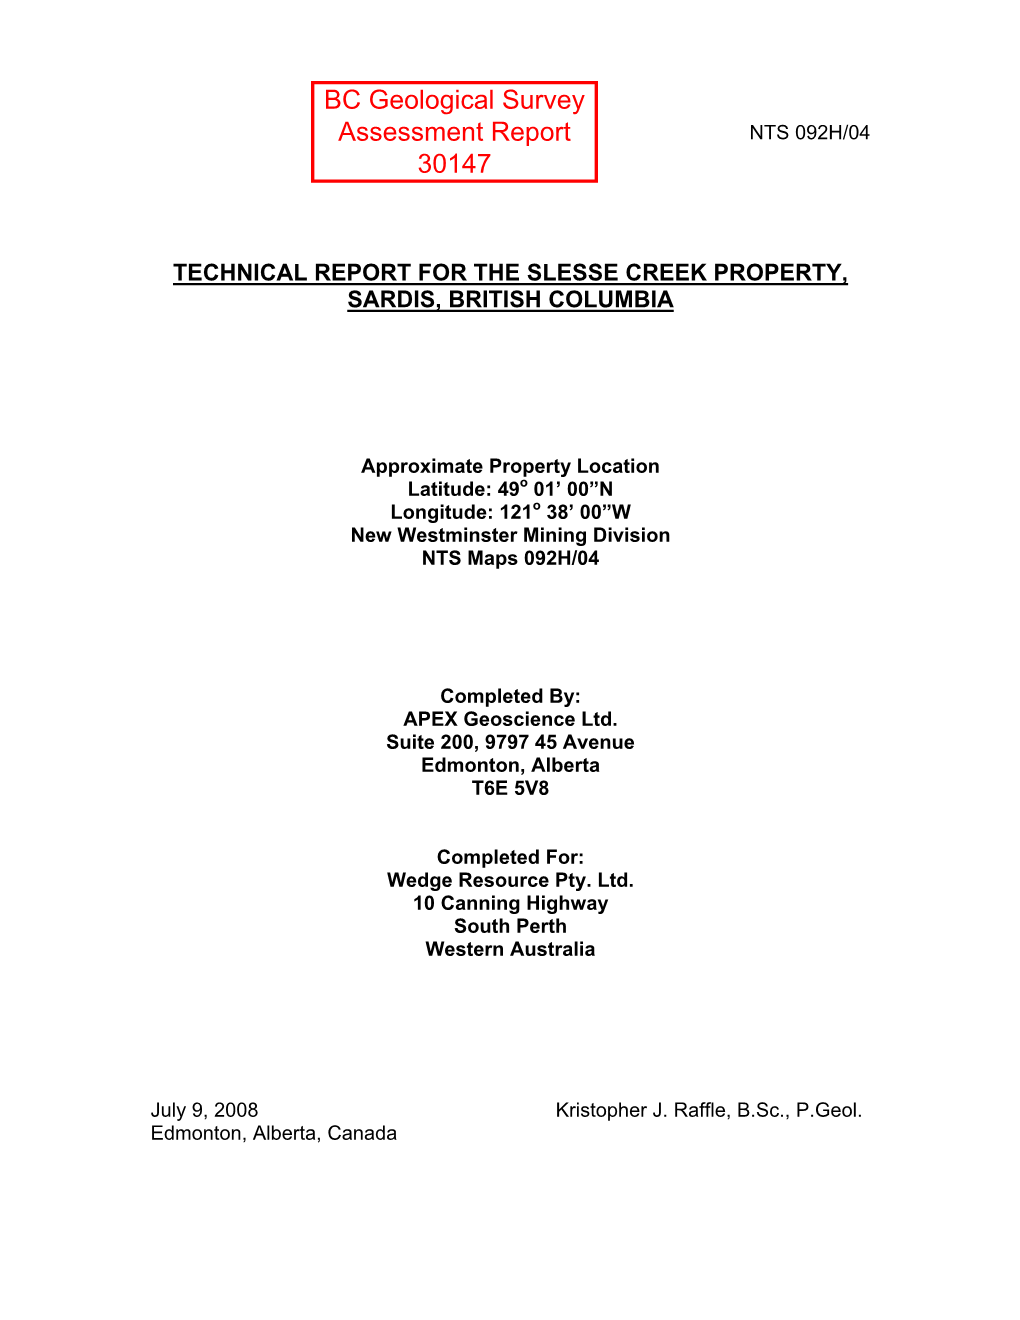 BC Geological Survey Assessment Report 30147